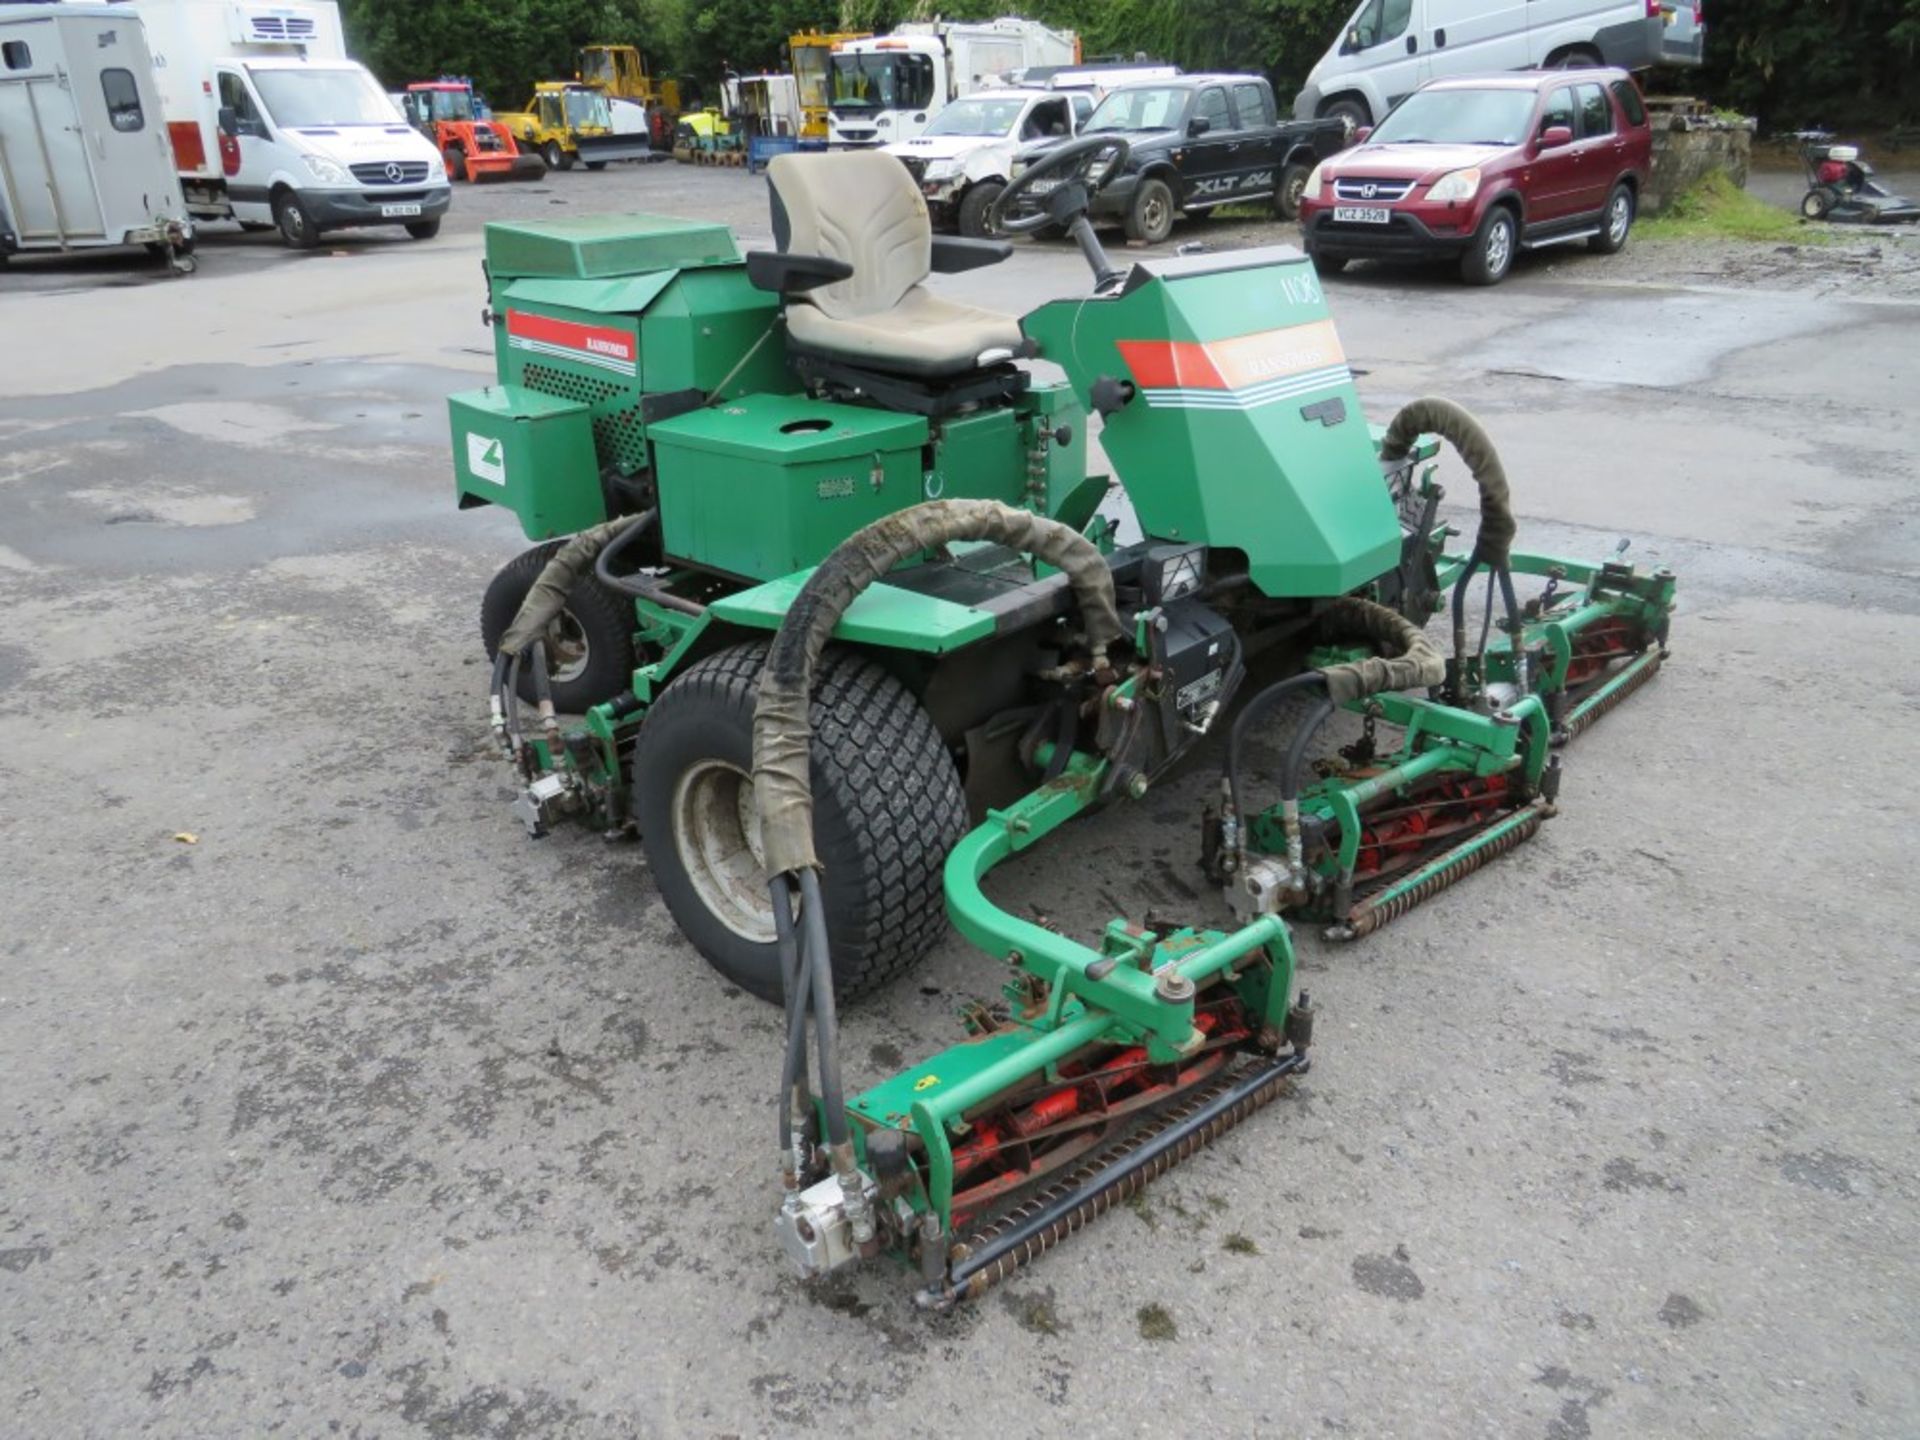 RANSOMES FAIRWAY 300 5 GANG RIDE ON MOWER, 6464 HOURS [+ VAT] - Image 2 of 6